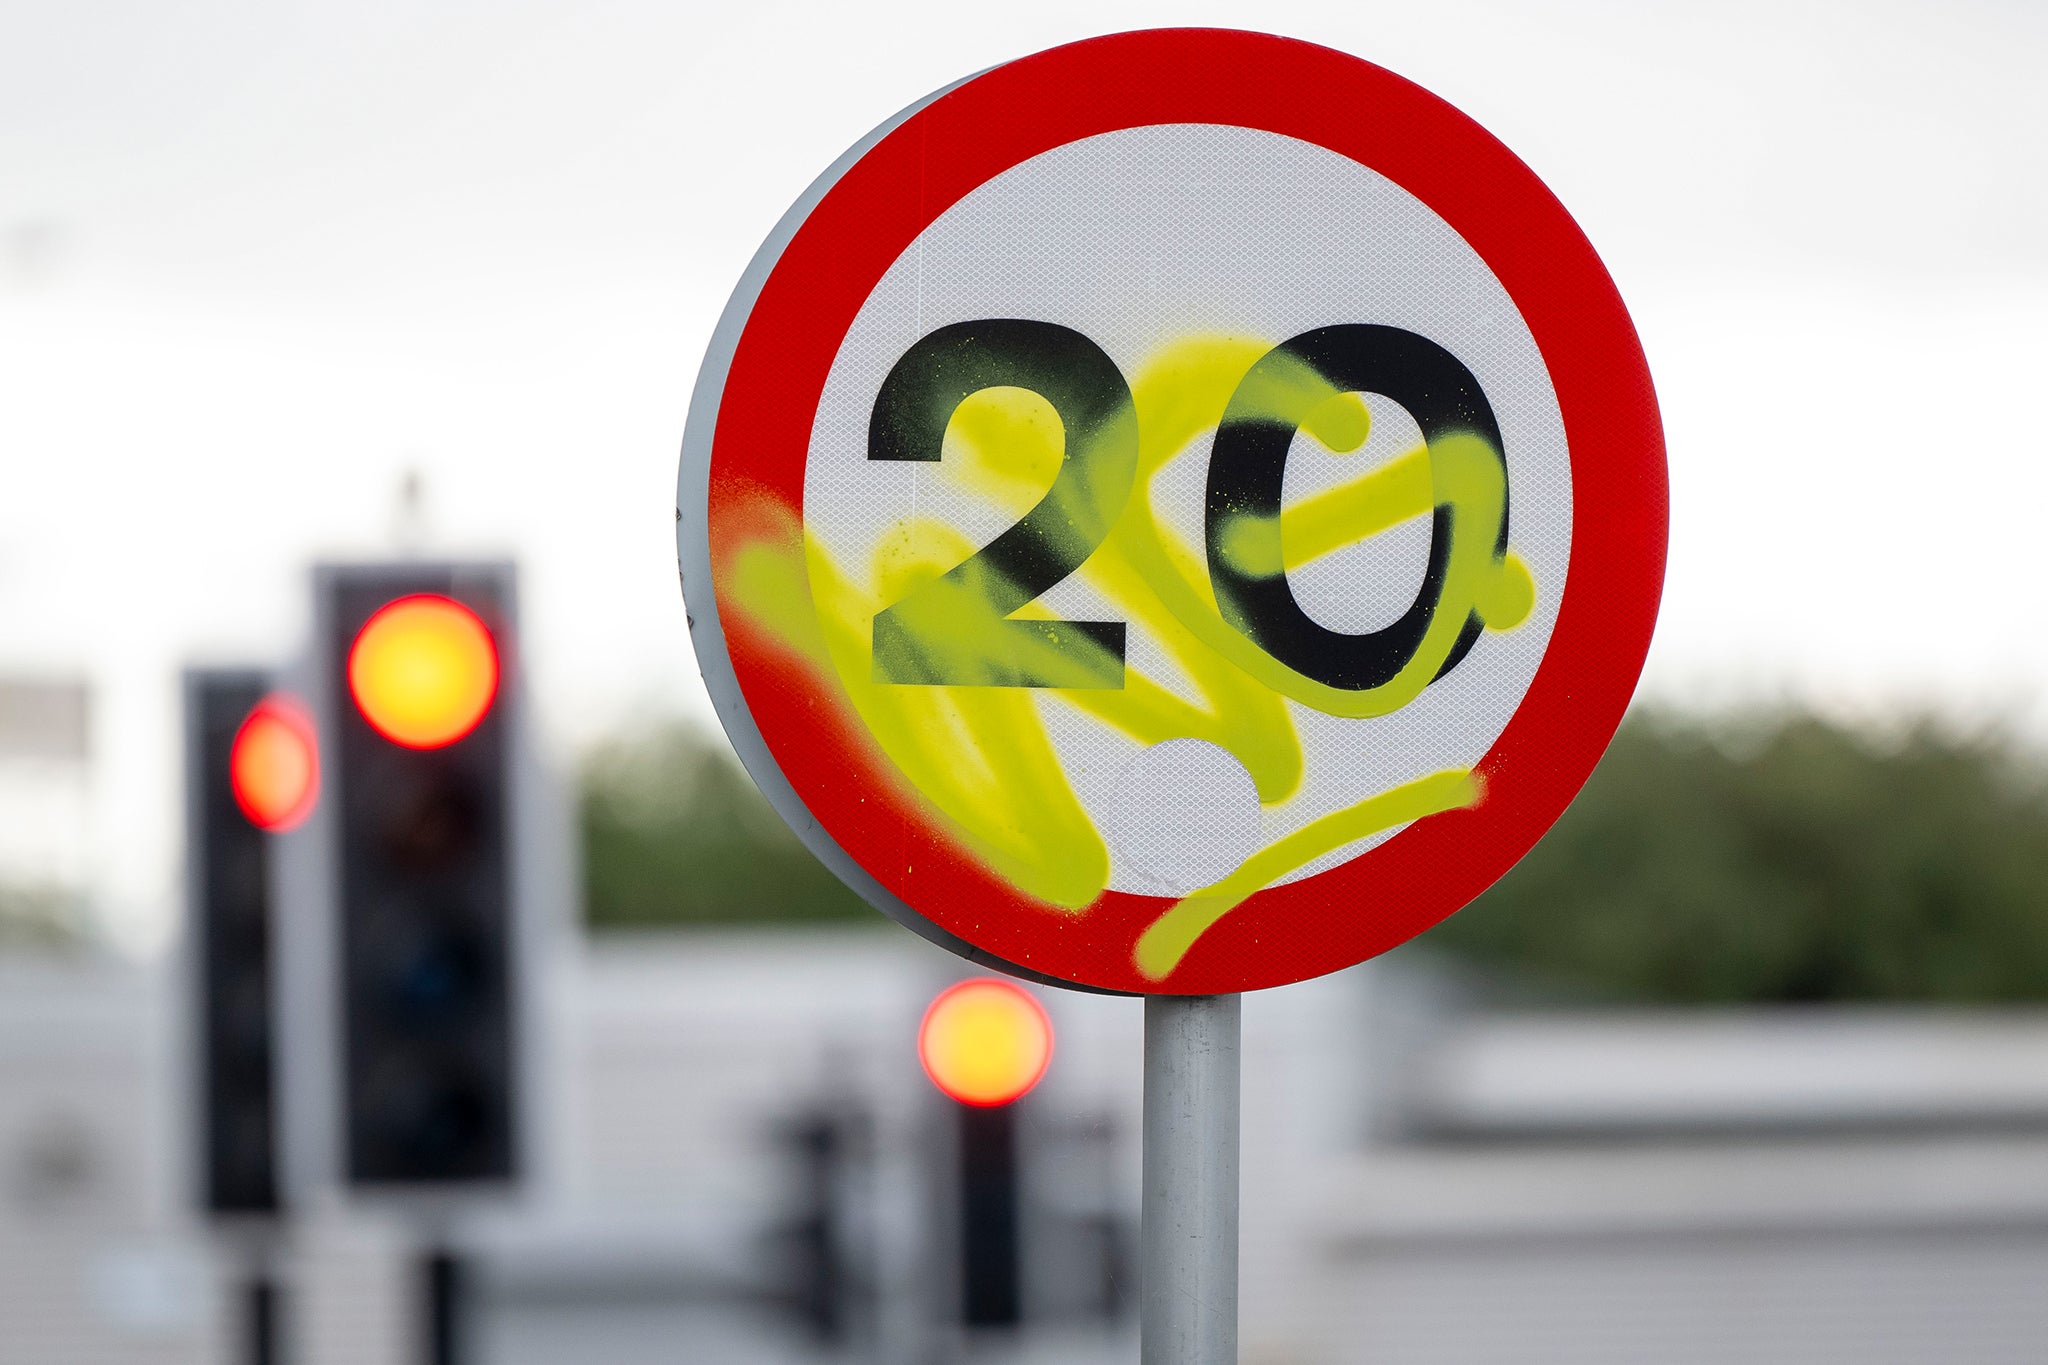 A vandalised 20mph sign on Sloper Road in Cardiff, Wales.